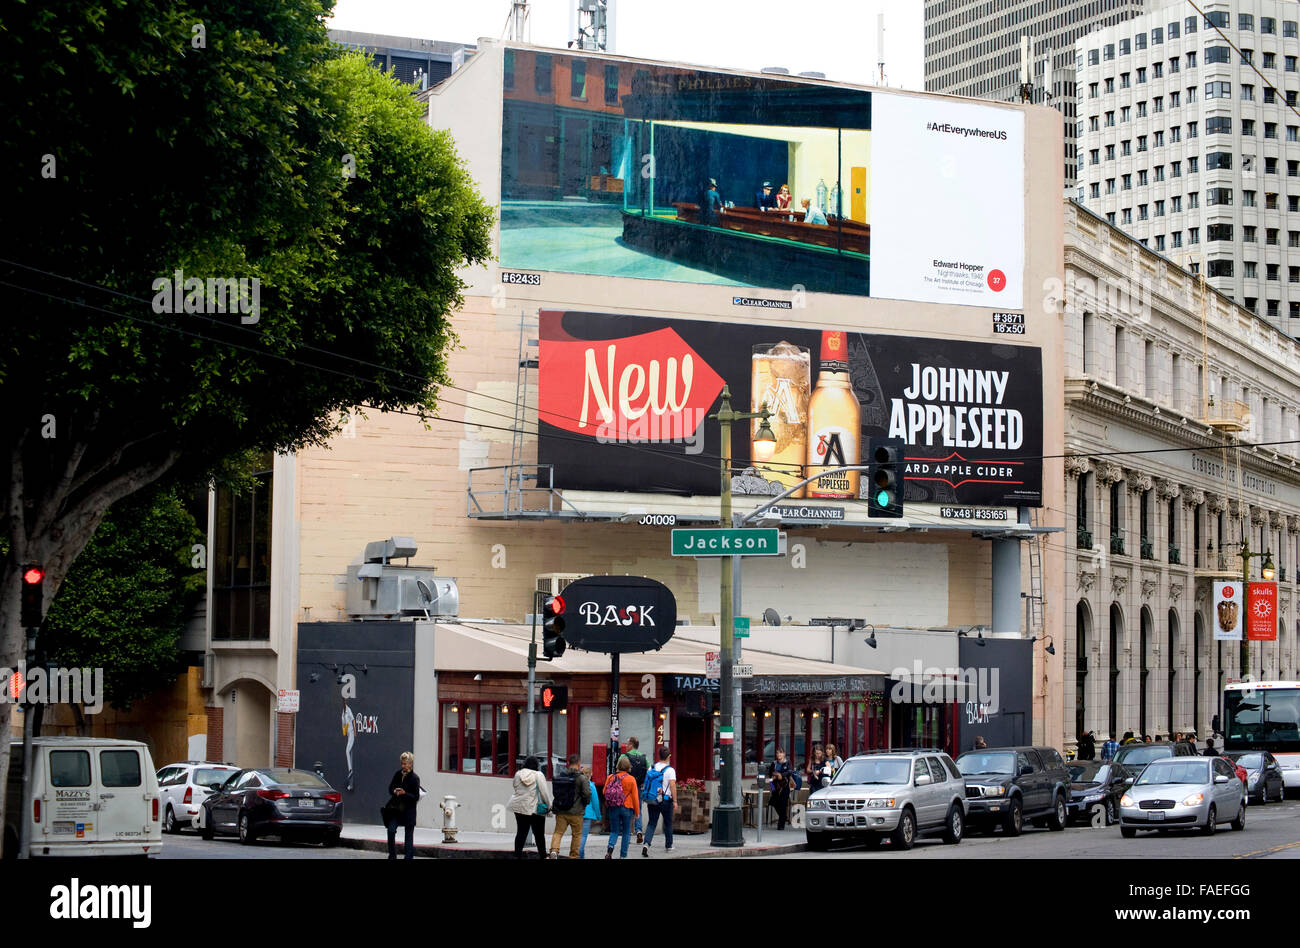 An Edward Hopper painting appears on an outdoor advertising billboard in San Francisco during the Art Everywhere event. Stock Photo